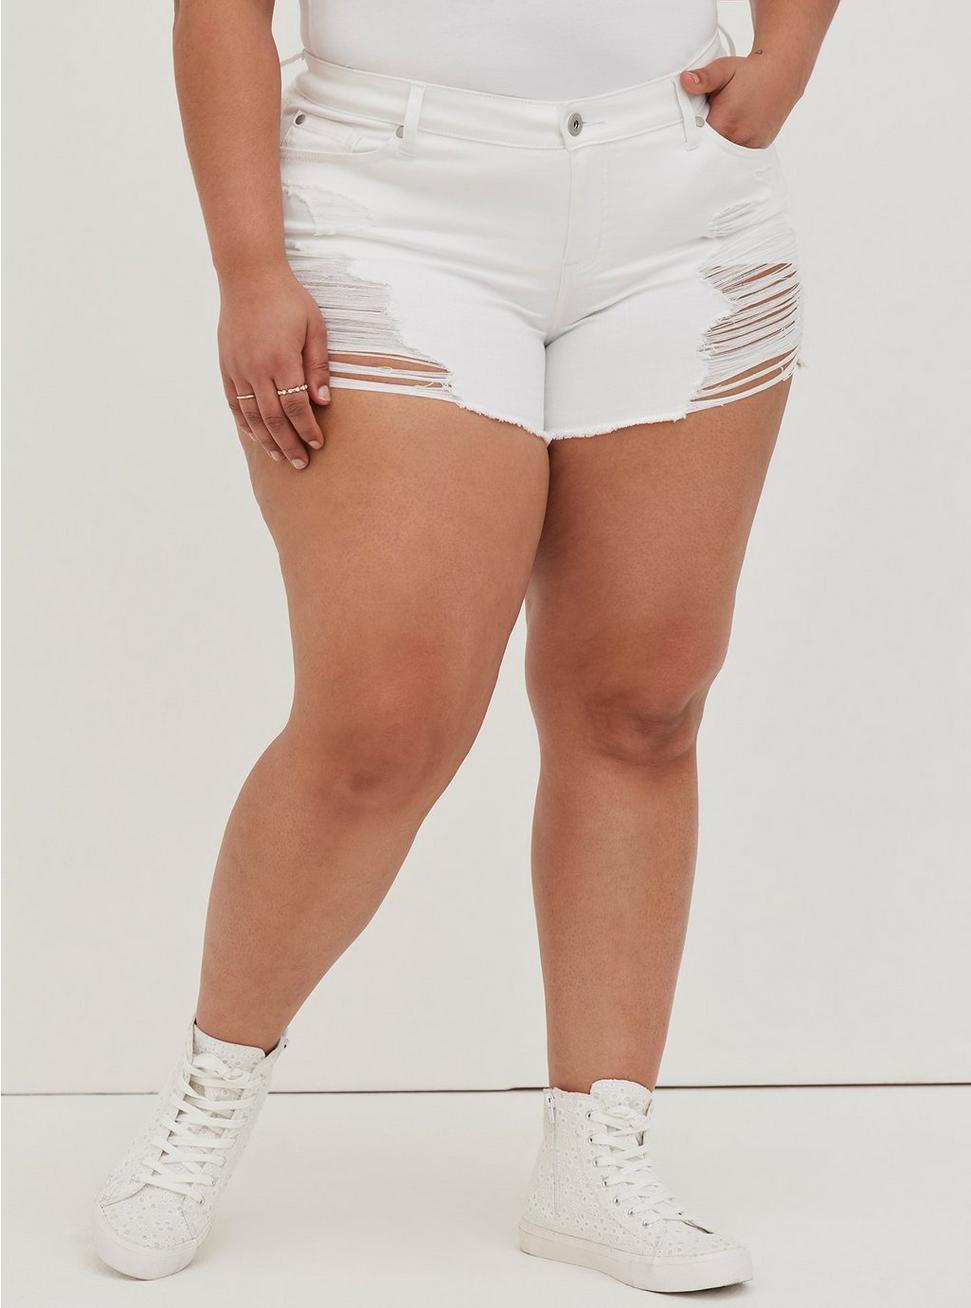 3.5 Inch Vintage Stretch Mid-Rise Short, OPTIC WHITE, hi-res